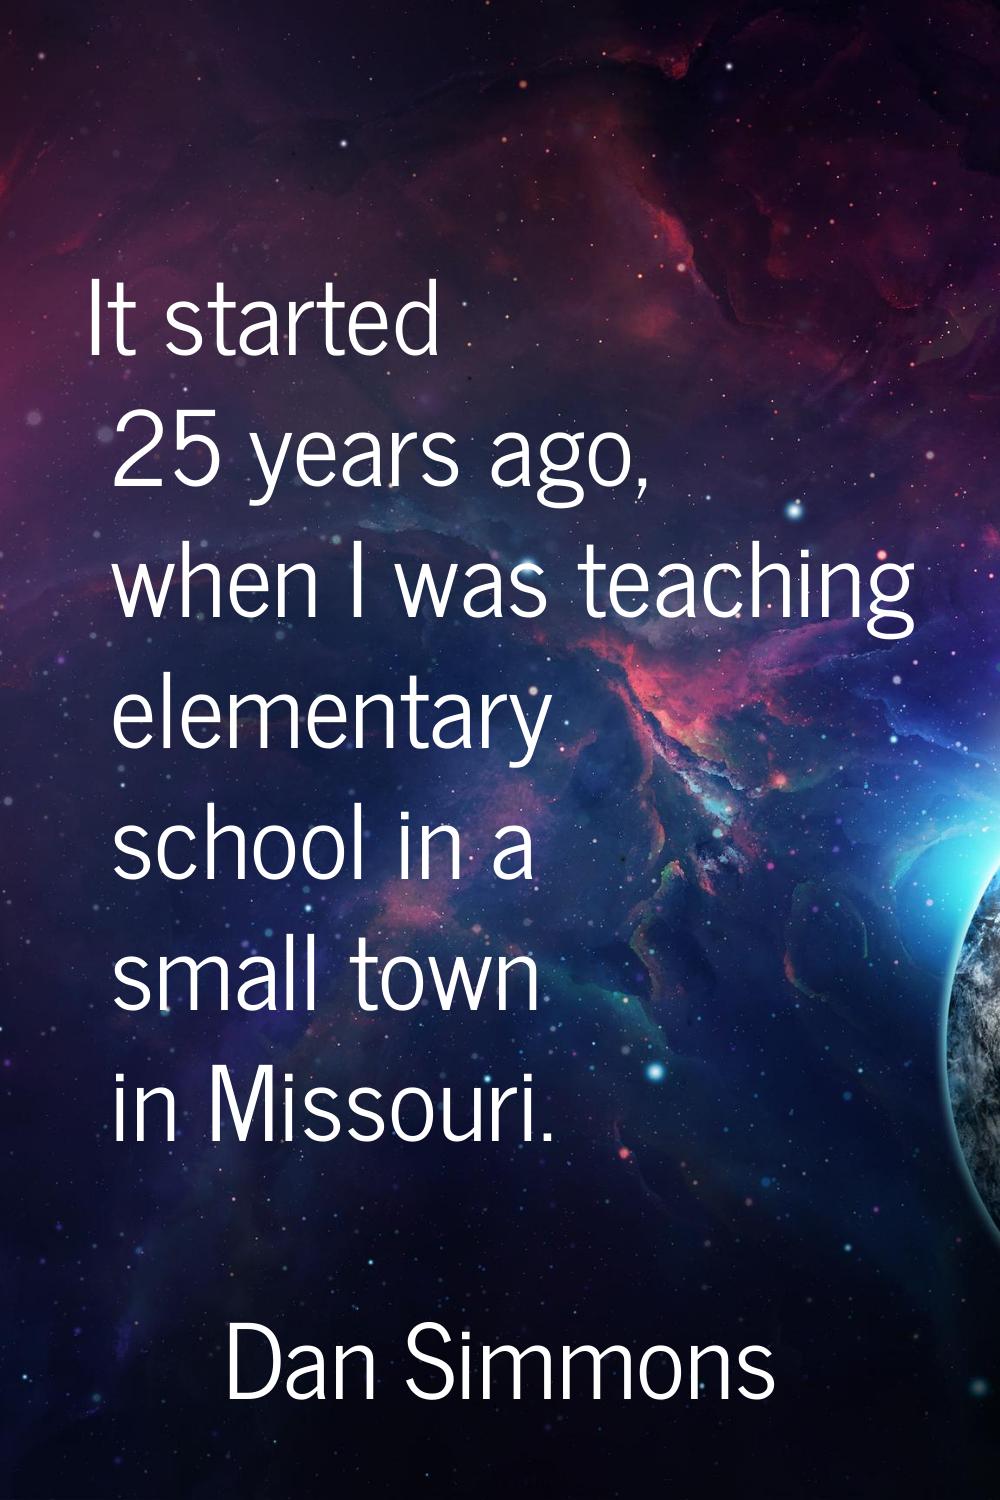 It started 25 years ago, when I was teaching elementary school in a small town in Missouri.